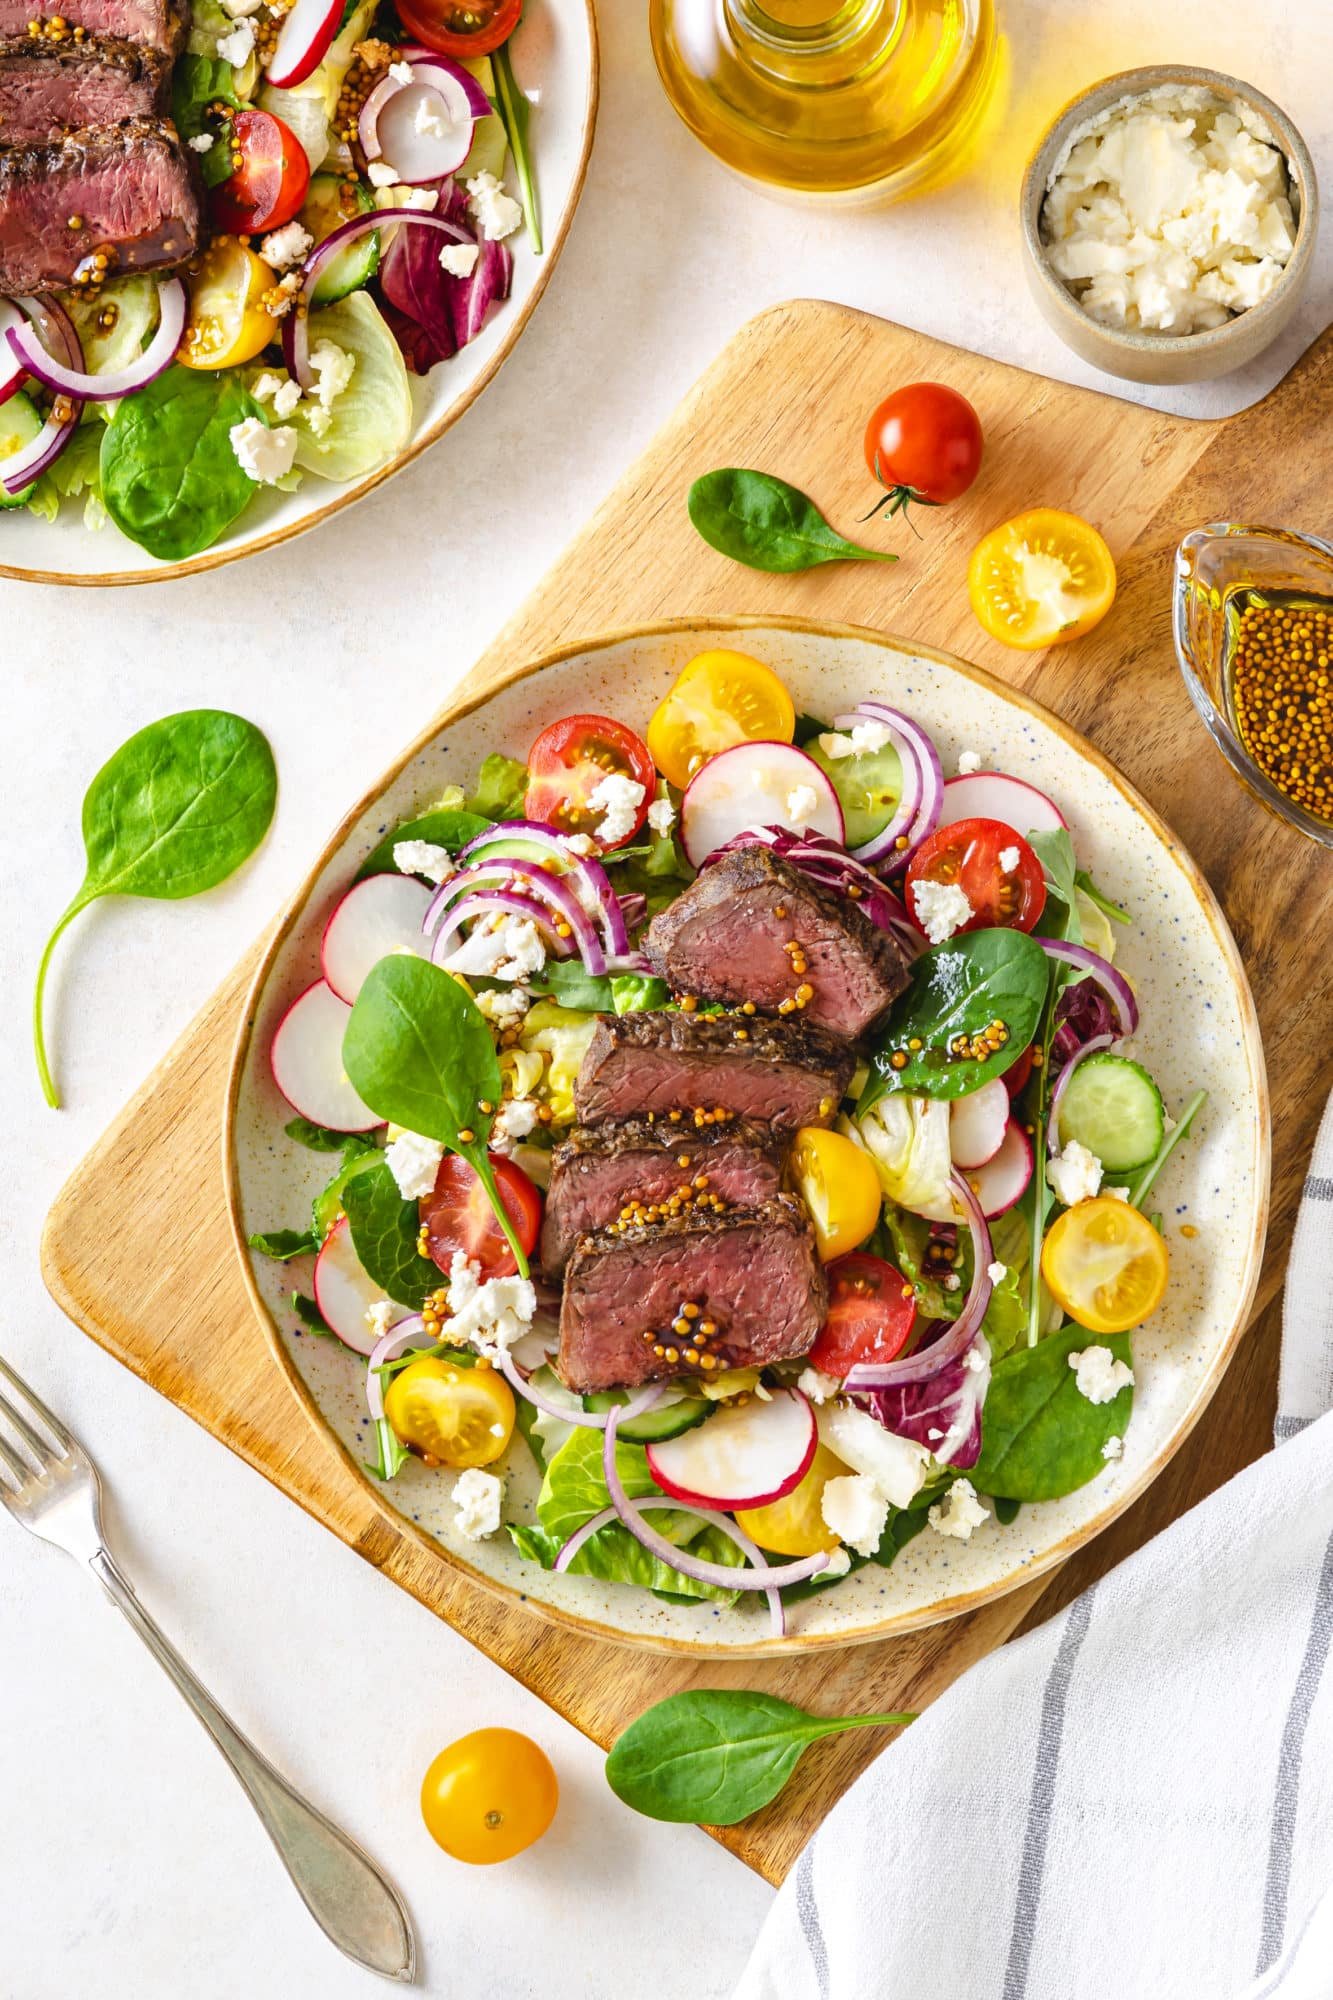 filet-mignon-salad-on-a-white-plate-on-a-wooden-nboard-with-tomatoes-and-greens-all-around-with-a-fork-on-the-side